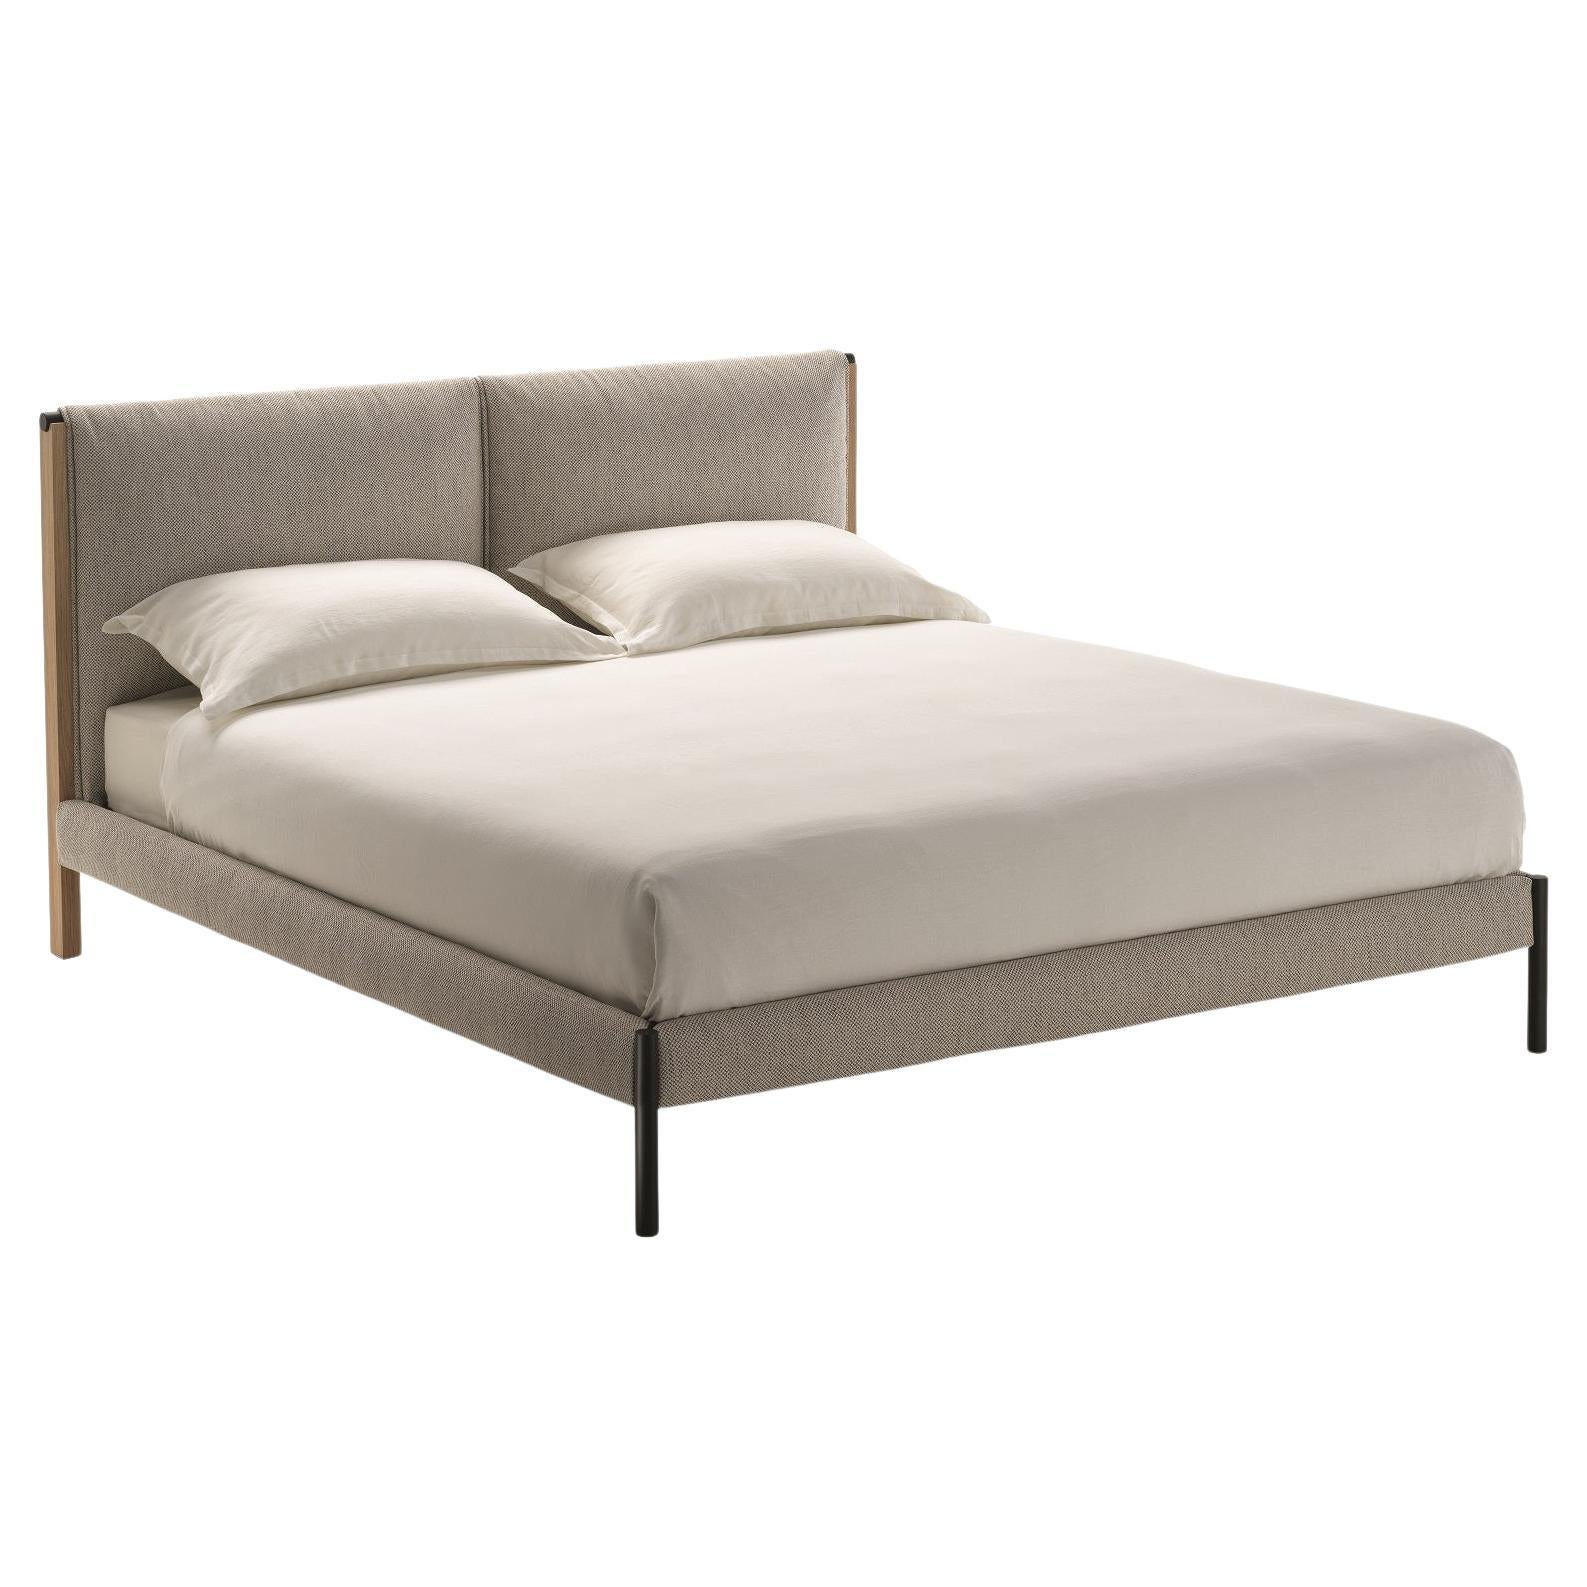 Zanotta Large Ricordi Bed with Single Springing in Toce Upholstery For Sale